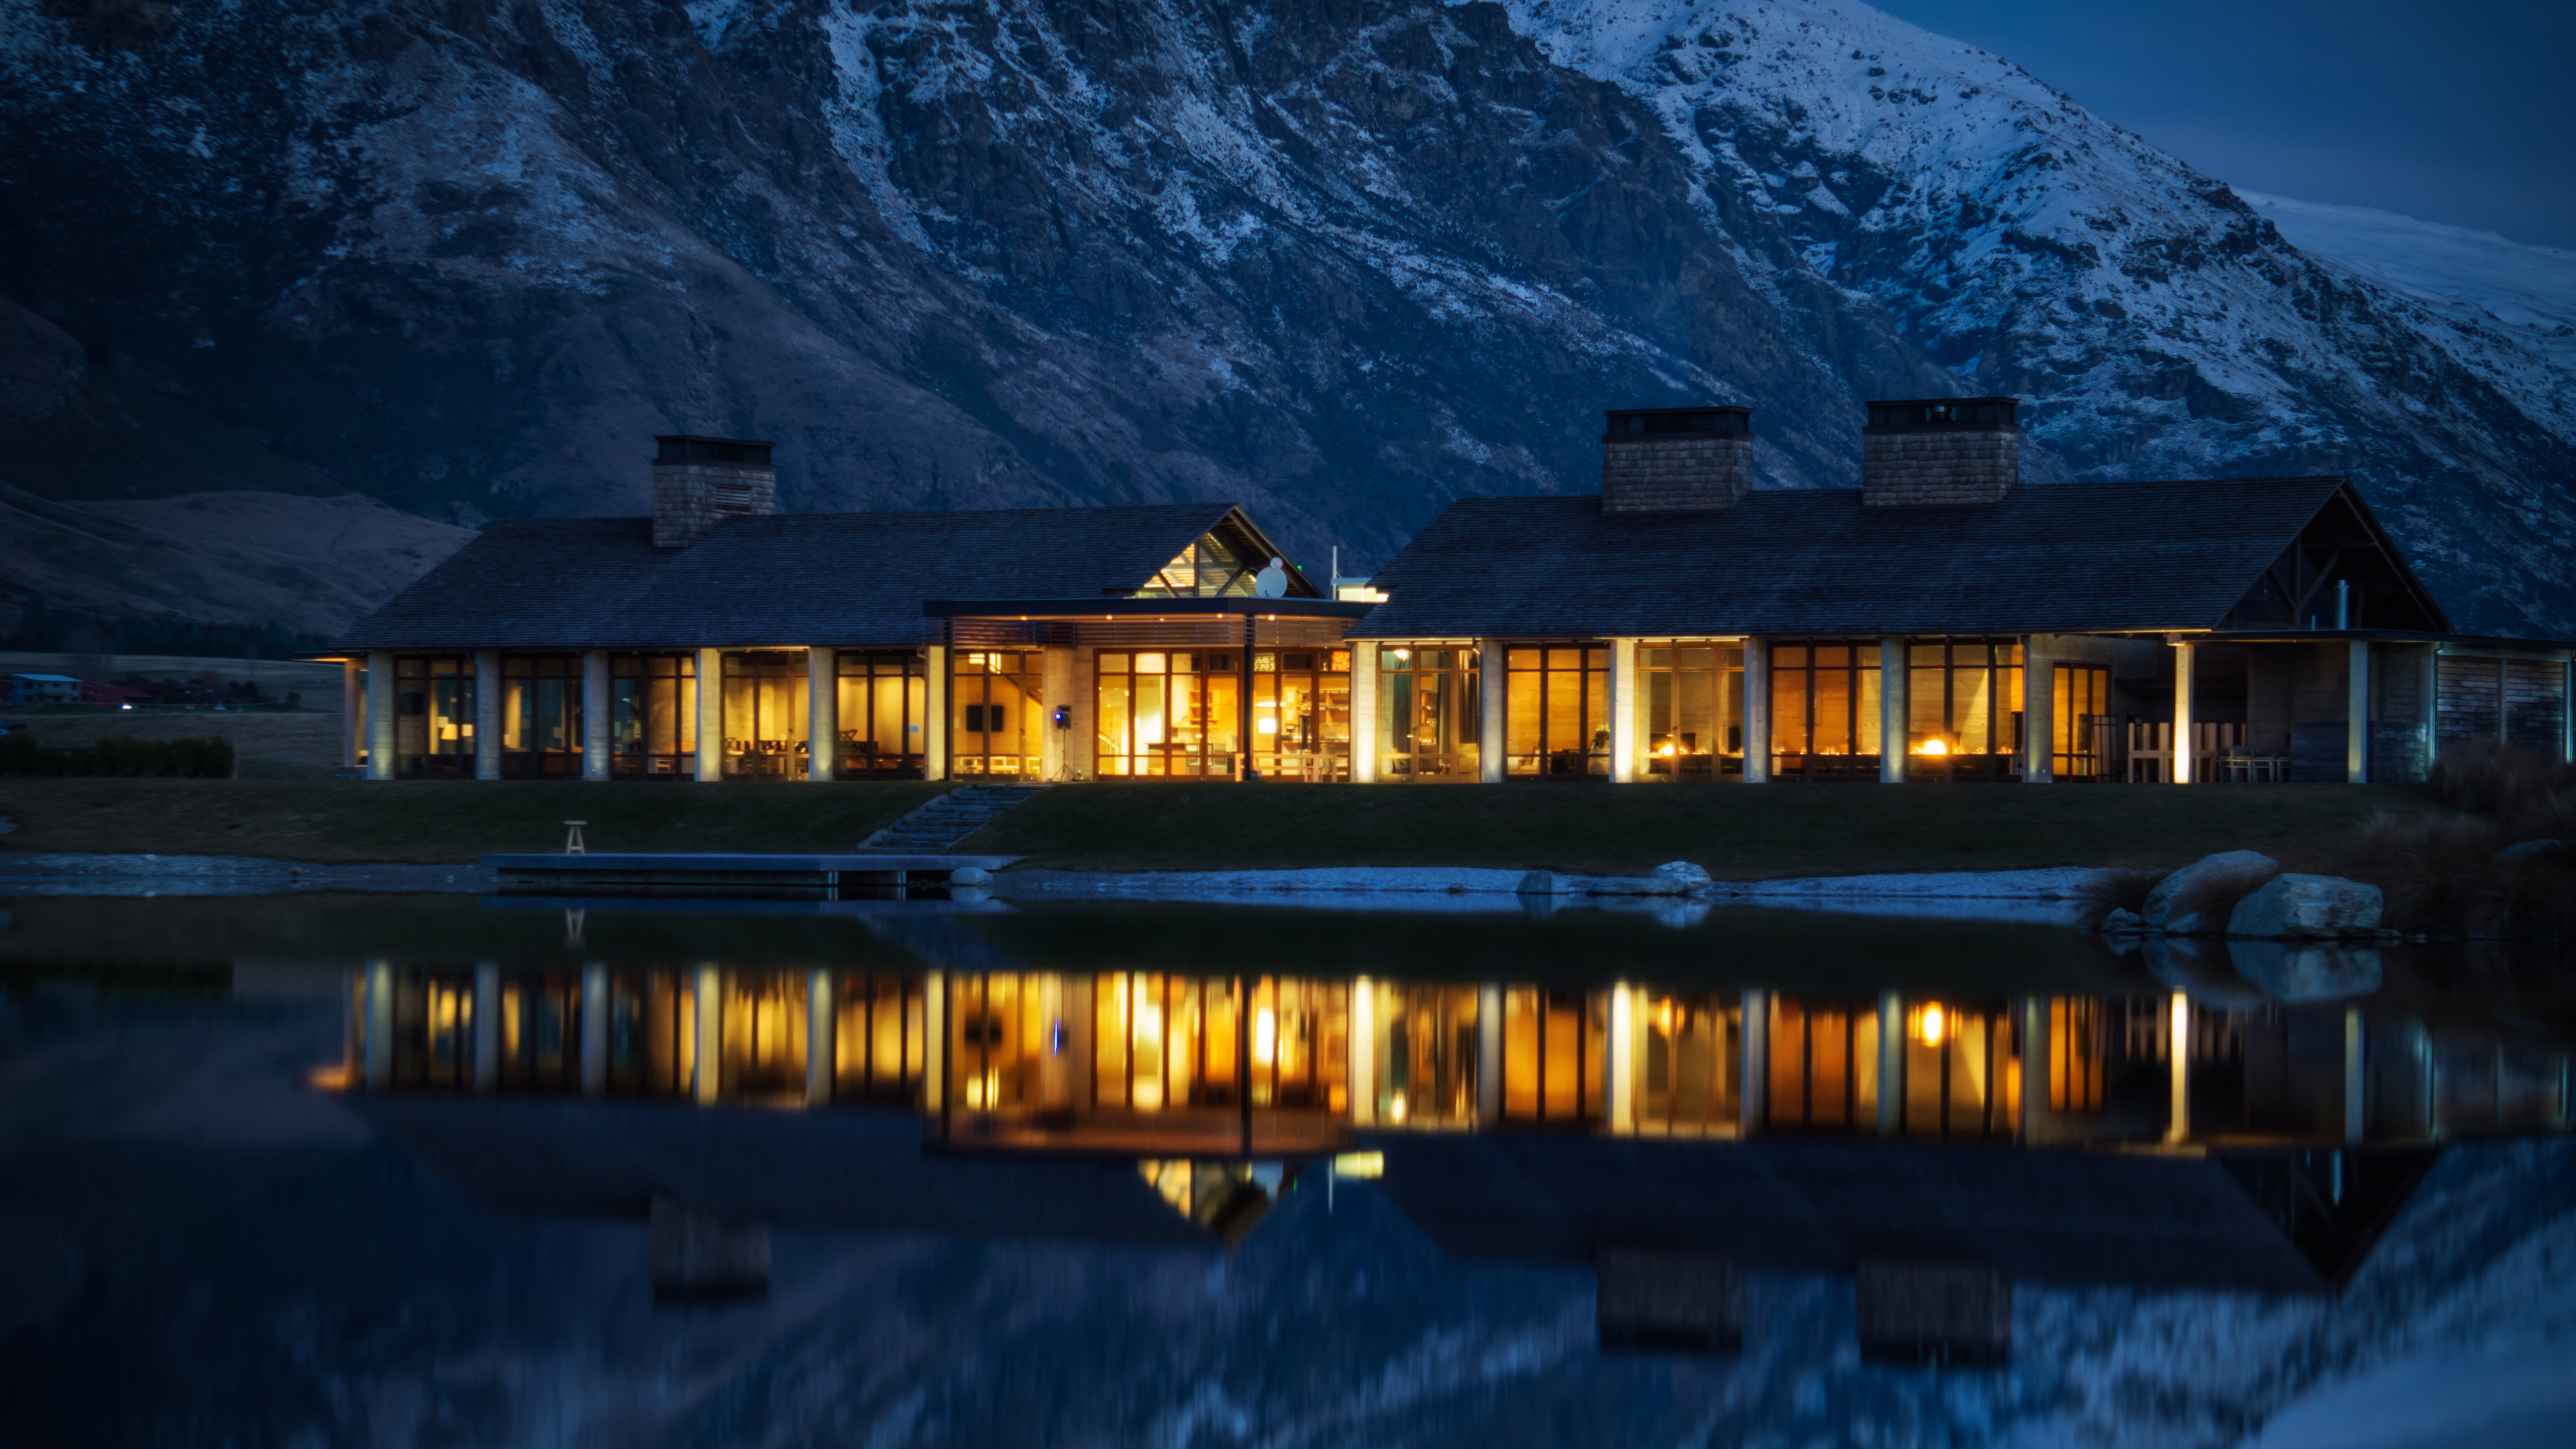 General 3840x2160 landscape 4K Queenstown New Zealand reflection water mountains snow house night lights